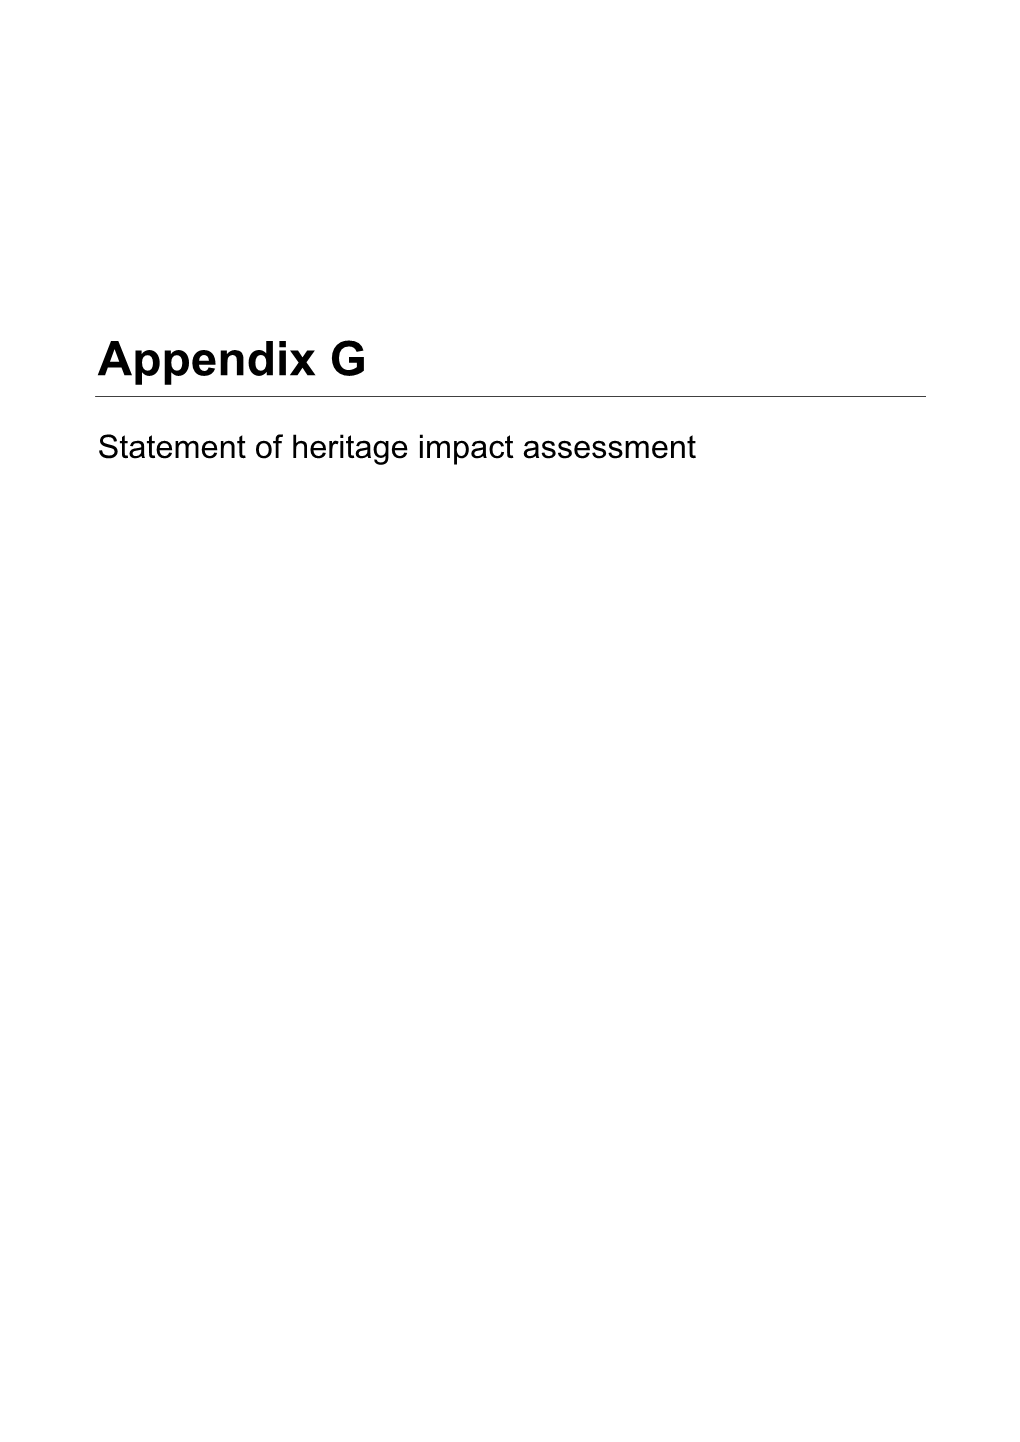 M1 REF Stage 1 Statement of Heritage Impact Assessment Appendix G